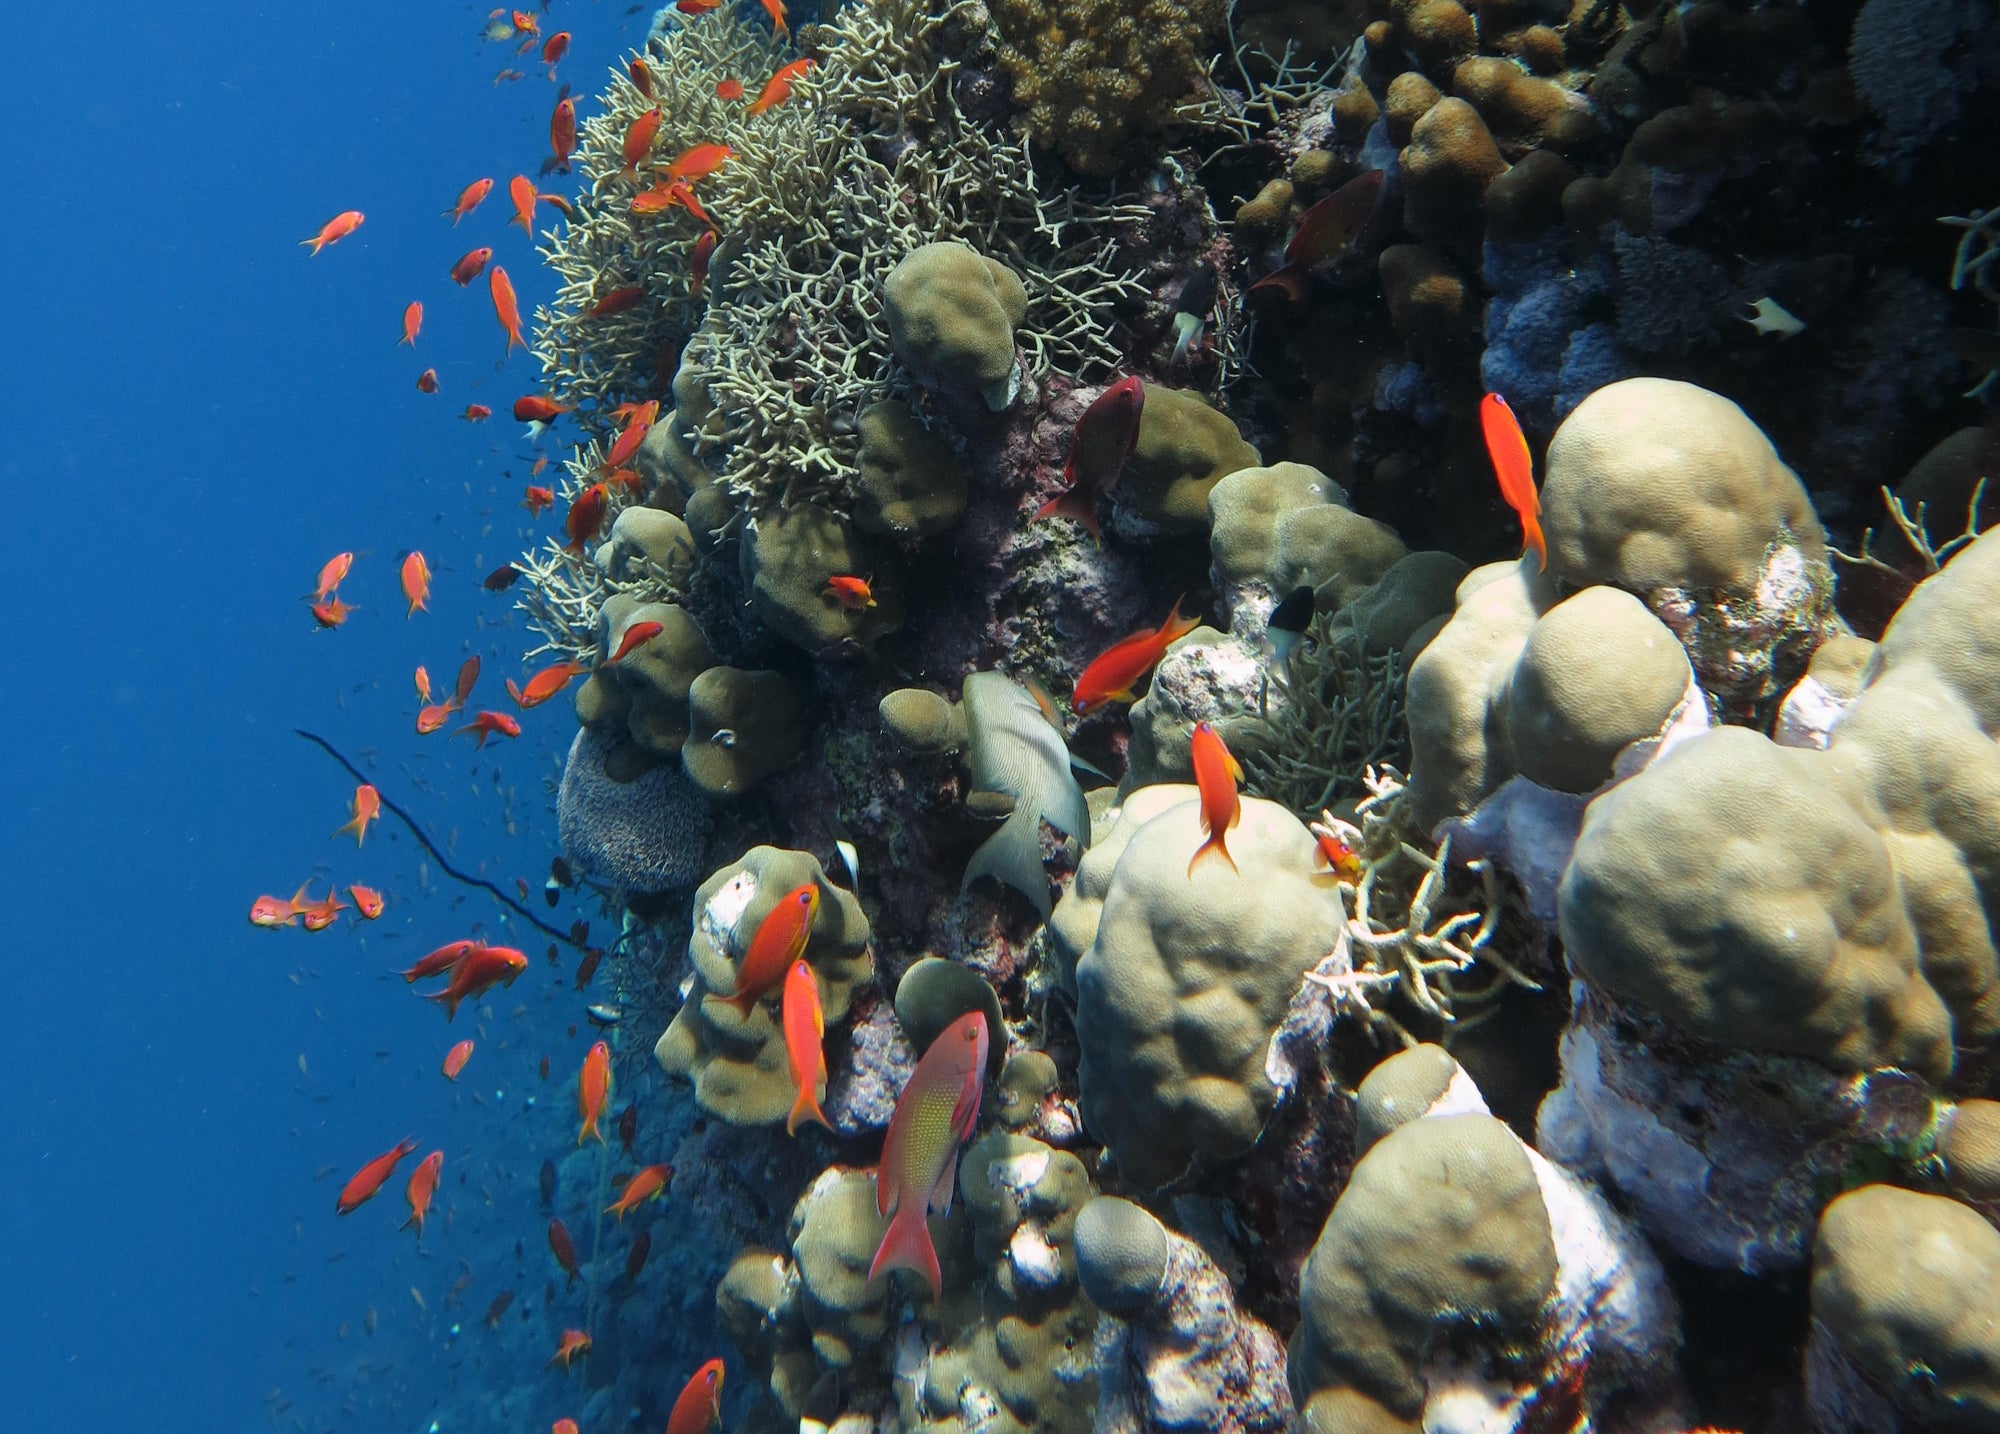 Red sea corals provide breeding and feeding grounds, but they are suffering from the effects of climate change